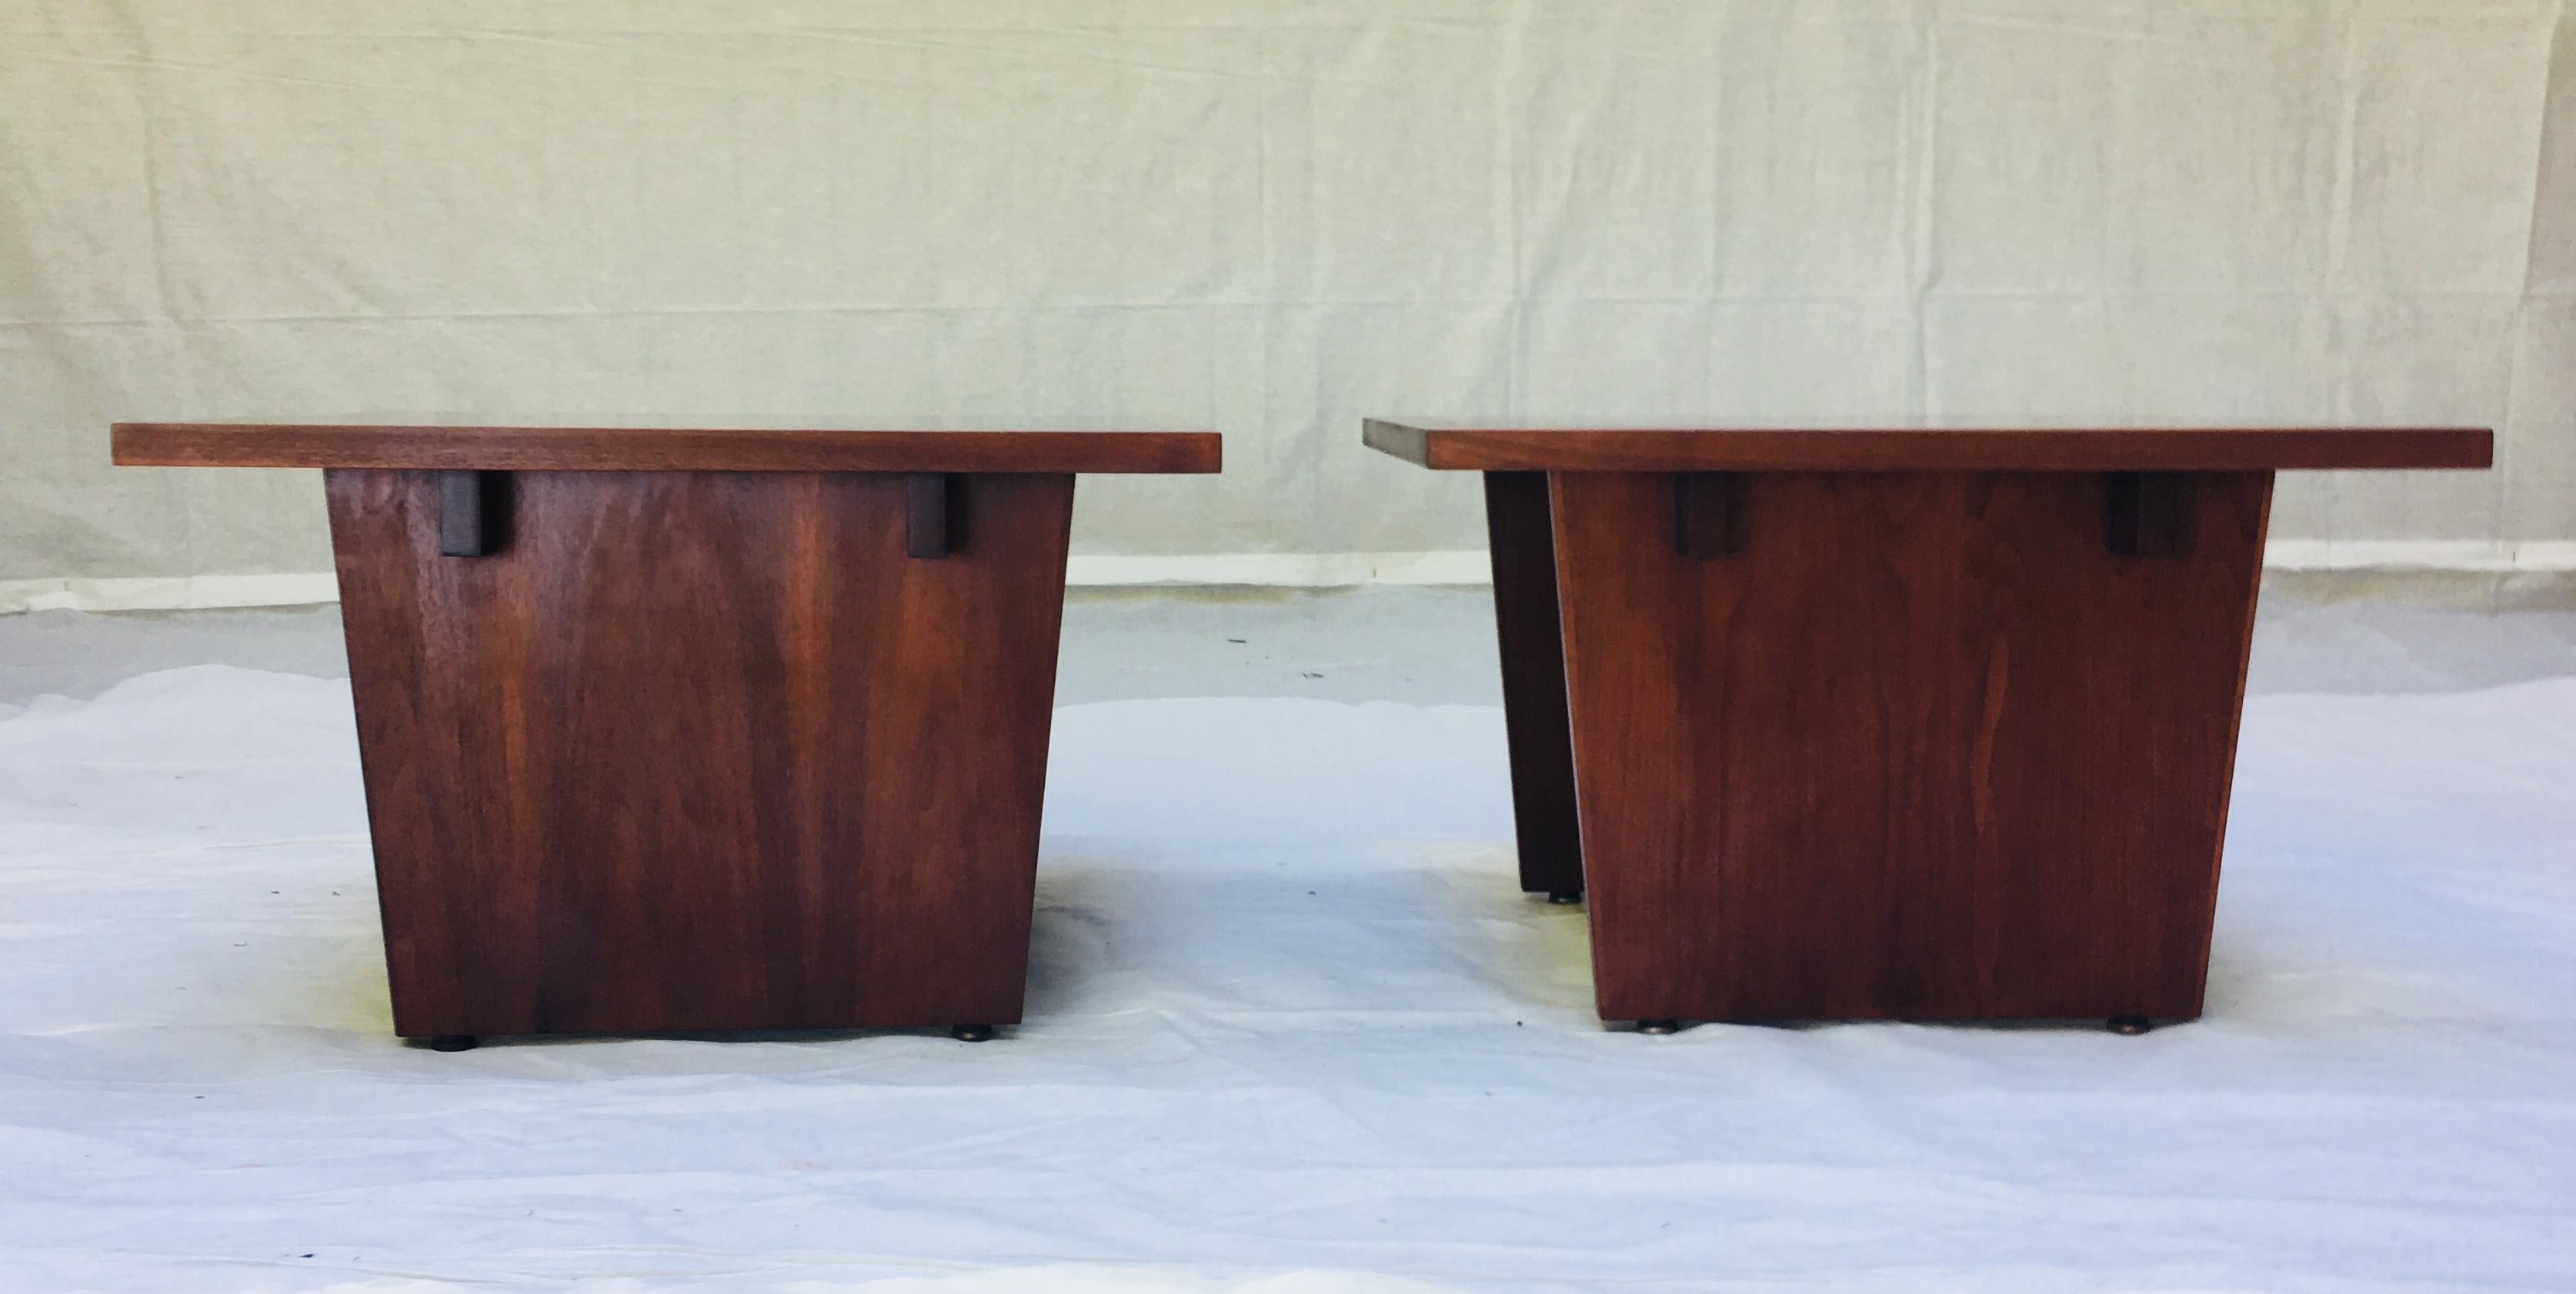 A pair of side tables by California Modern furniture craftsman Frank Rohloff. 
The table tops are black resin with pieces of walnut veneer set in the black resin creating a dynamic juxtaposition of materials bordered by a walnut outer edge.
The